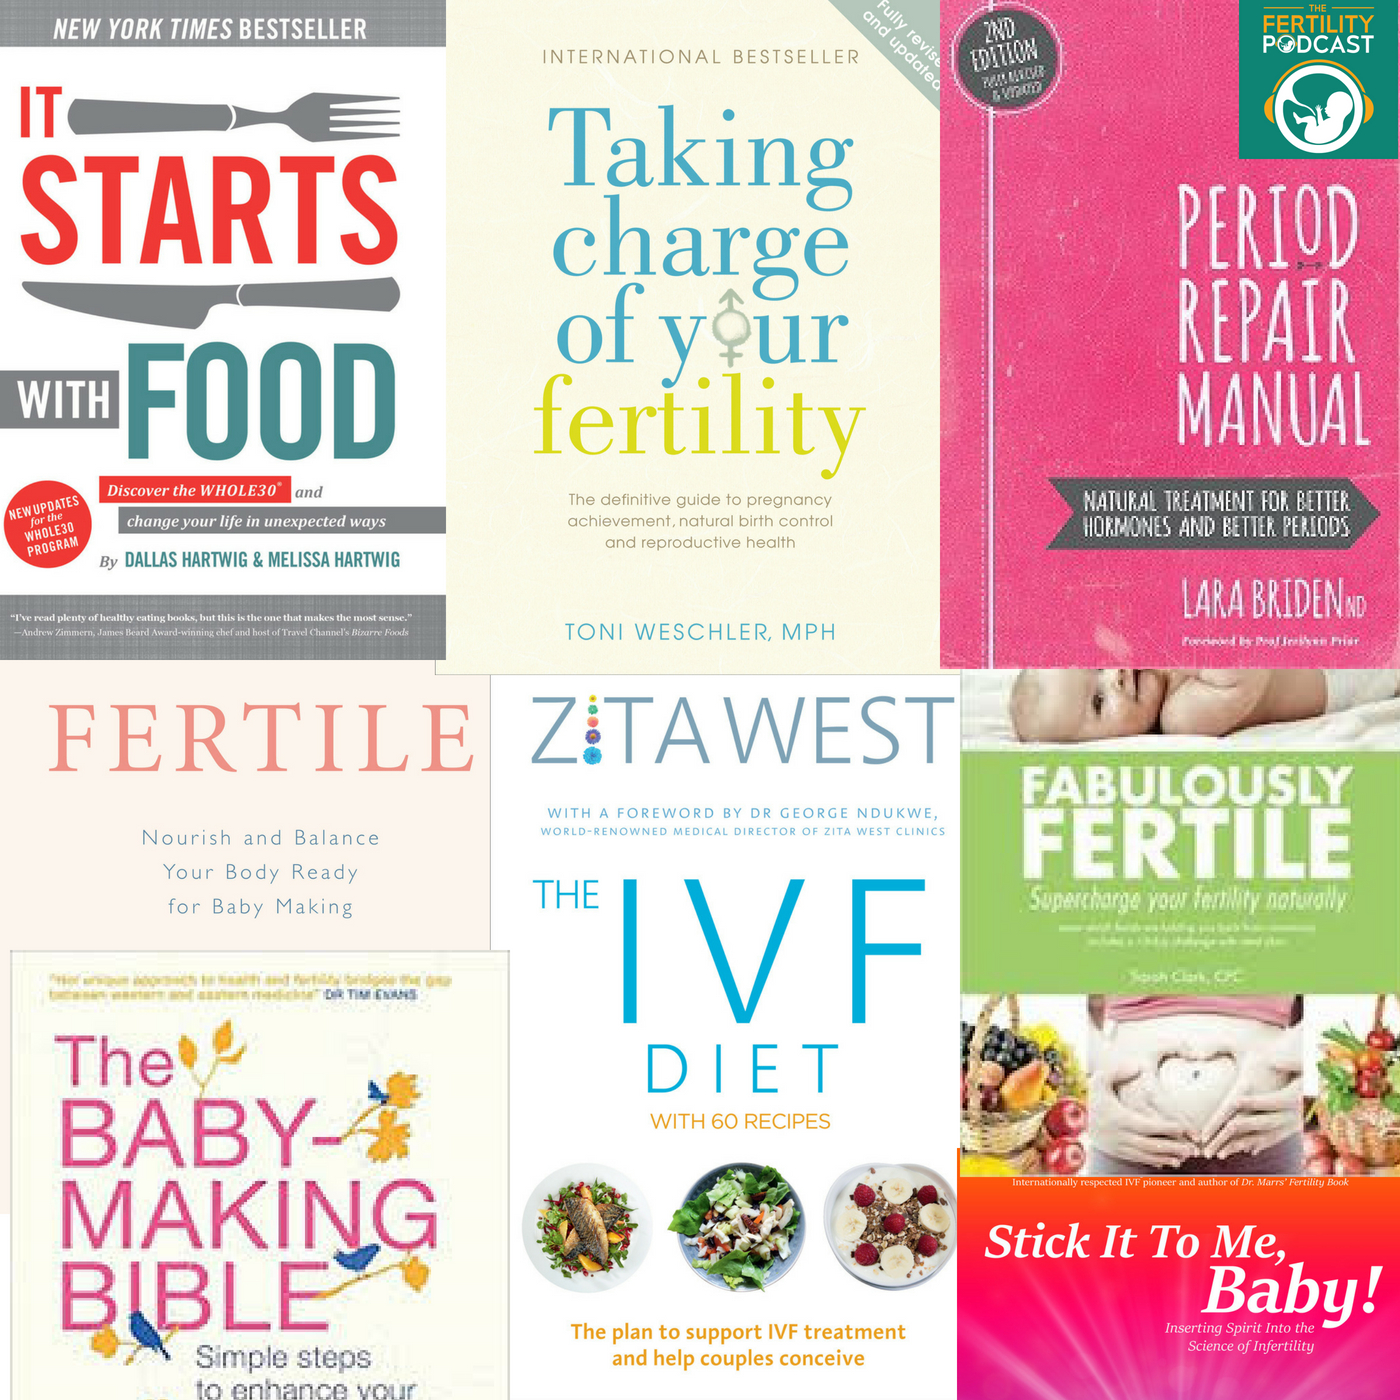 BONUS EPISODE: ***BOOK REVIEW AND FERTILITY BOOK GIVEAWAY***